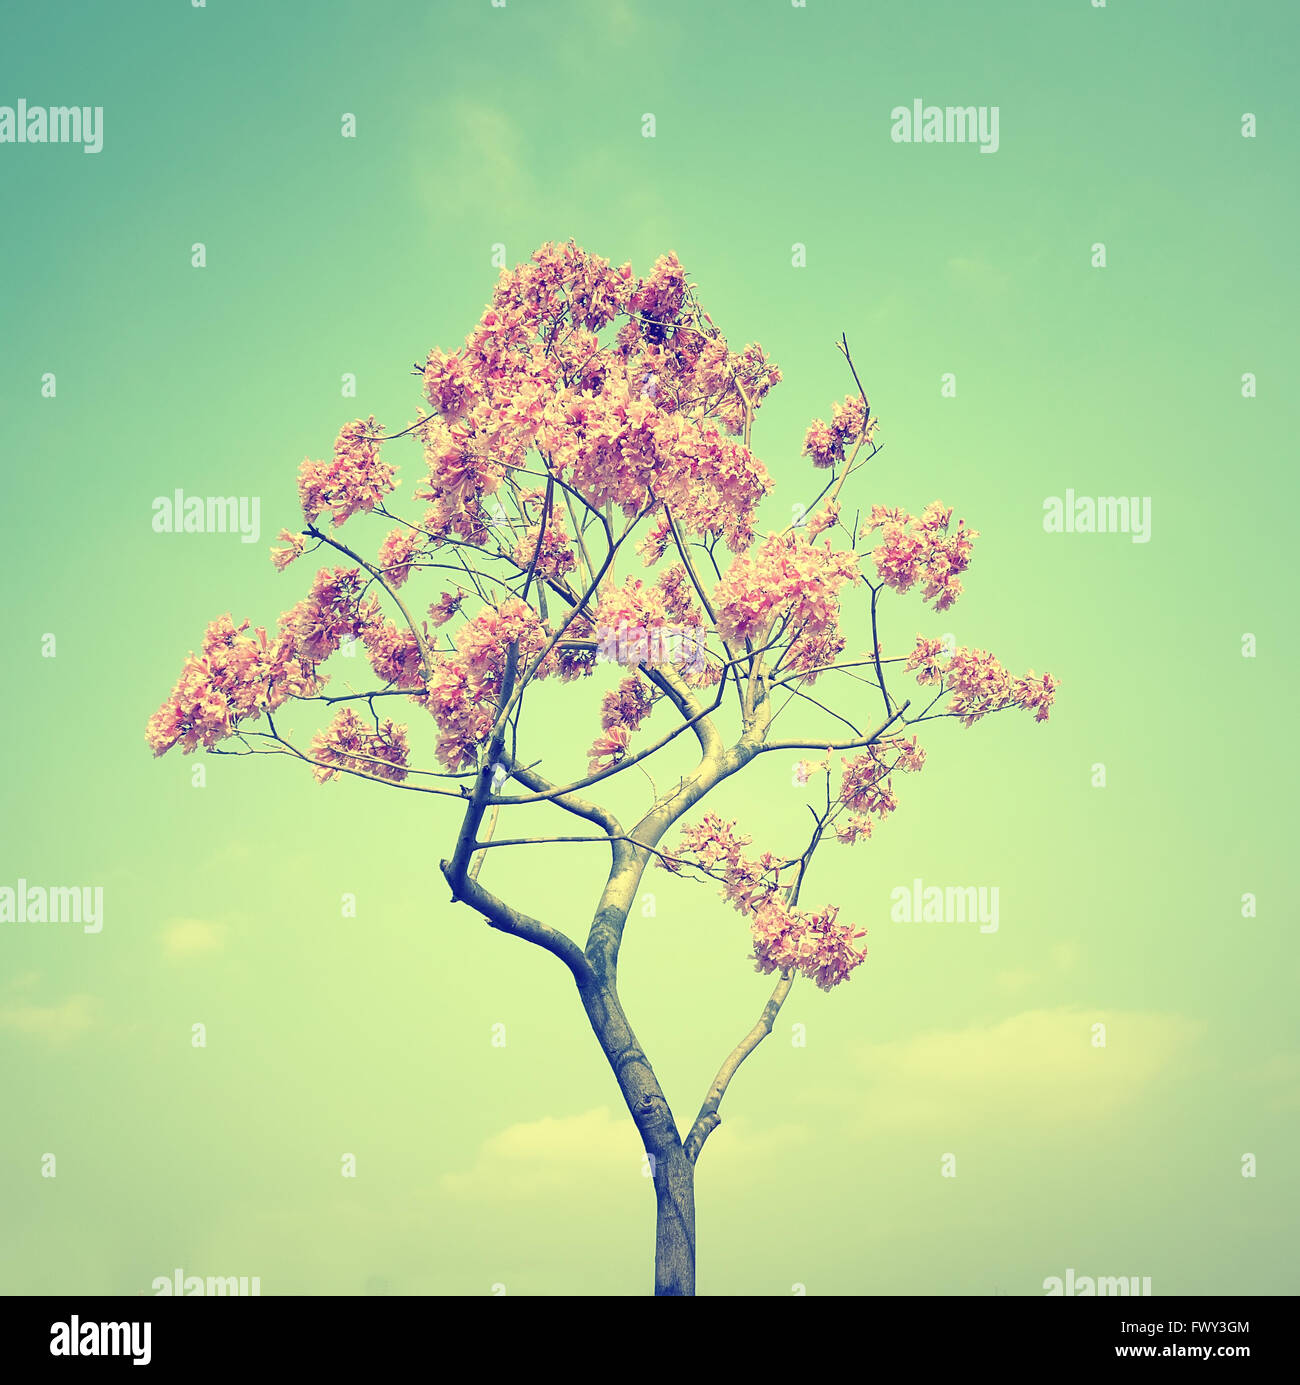 Tabebuia chrysotricha pink flowers blossom in spring Stock Photo